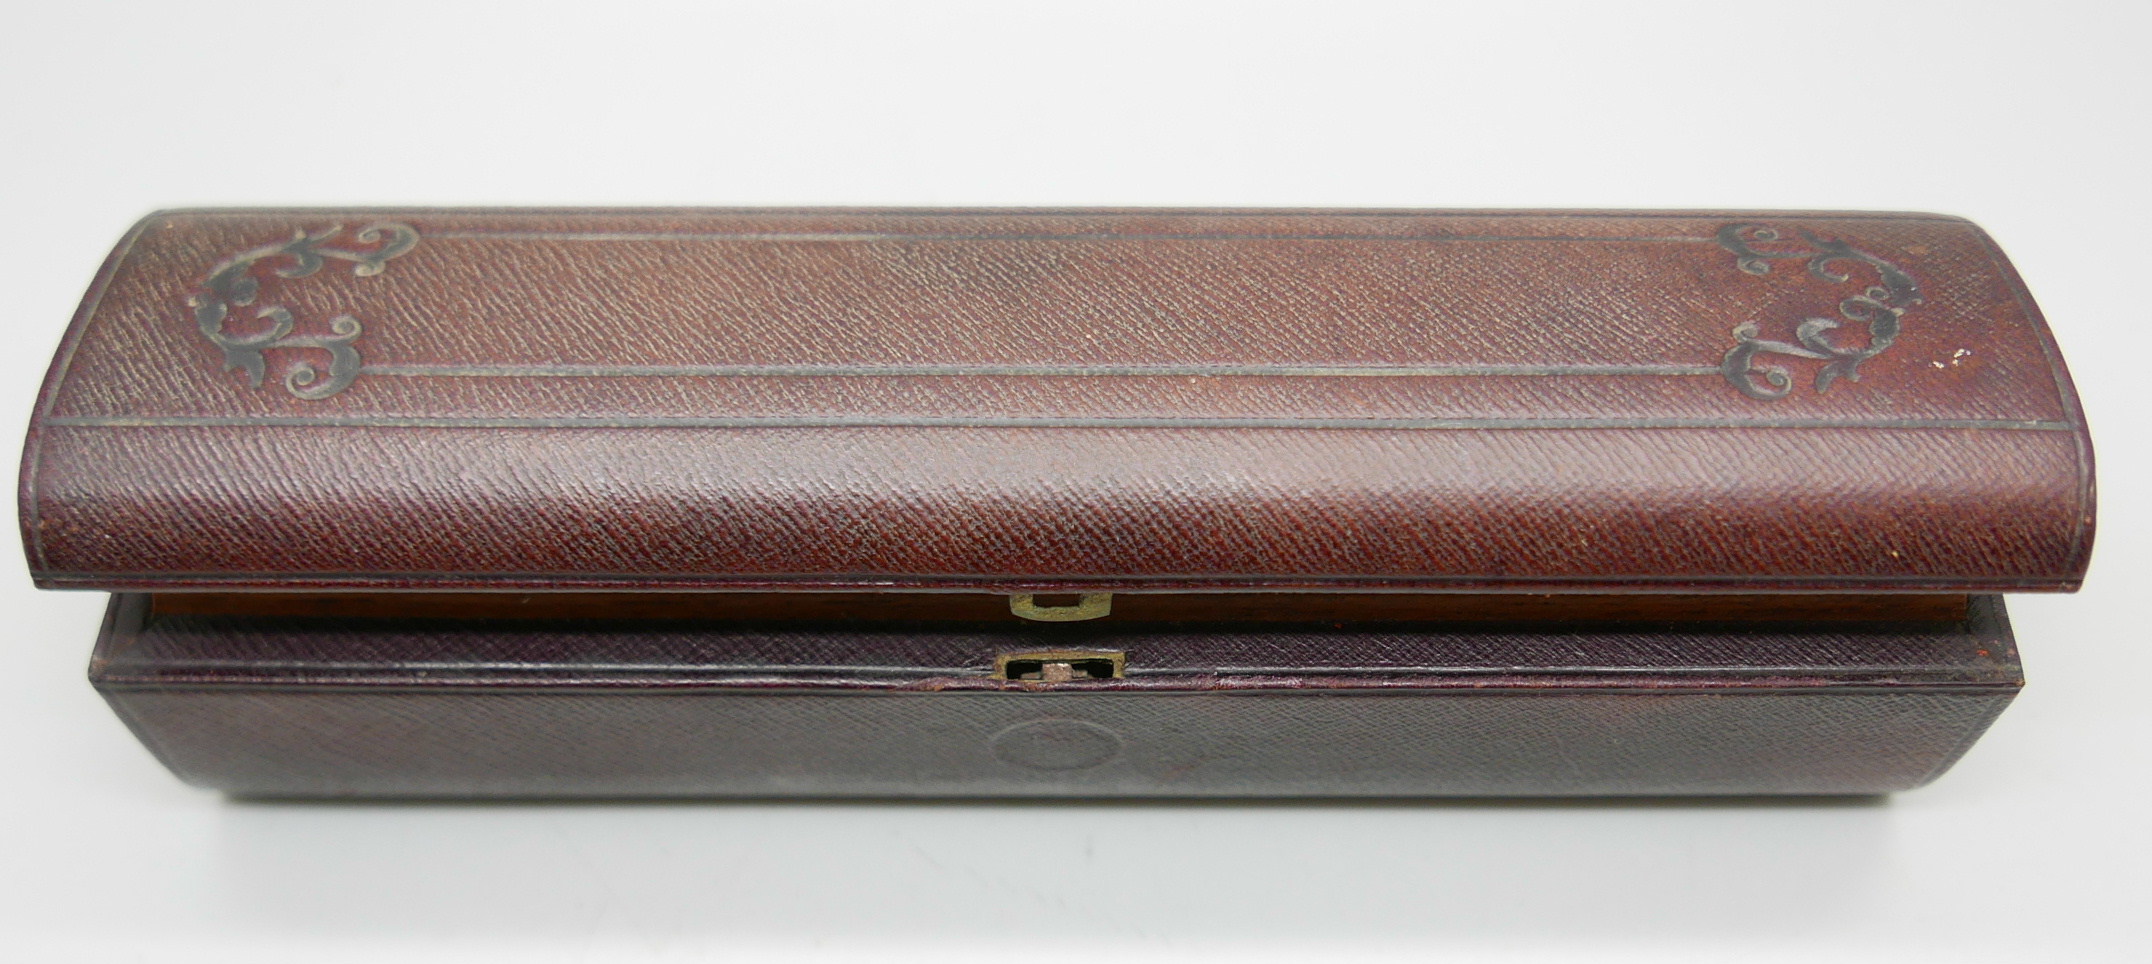 A vintage Moroccan leather pen box with small inkwell, Houghton 169 New Bond Street, inner liner box - Bild 4 aus 4